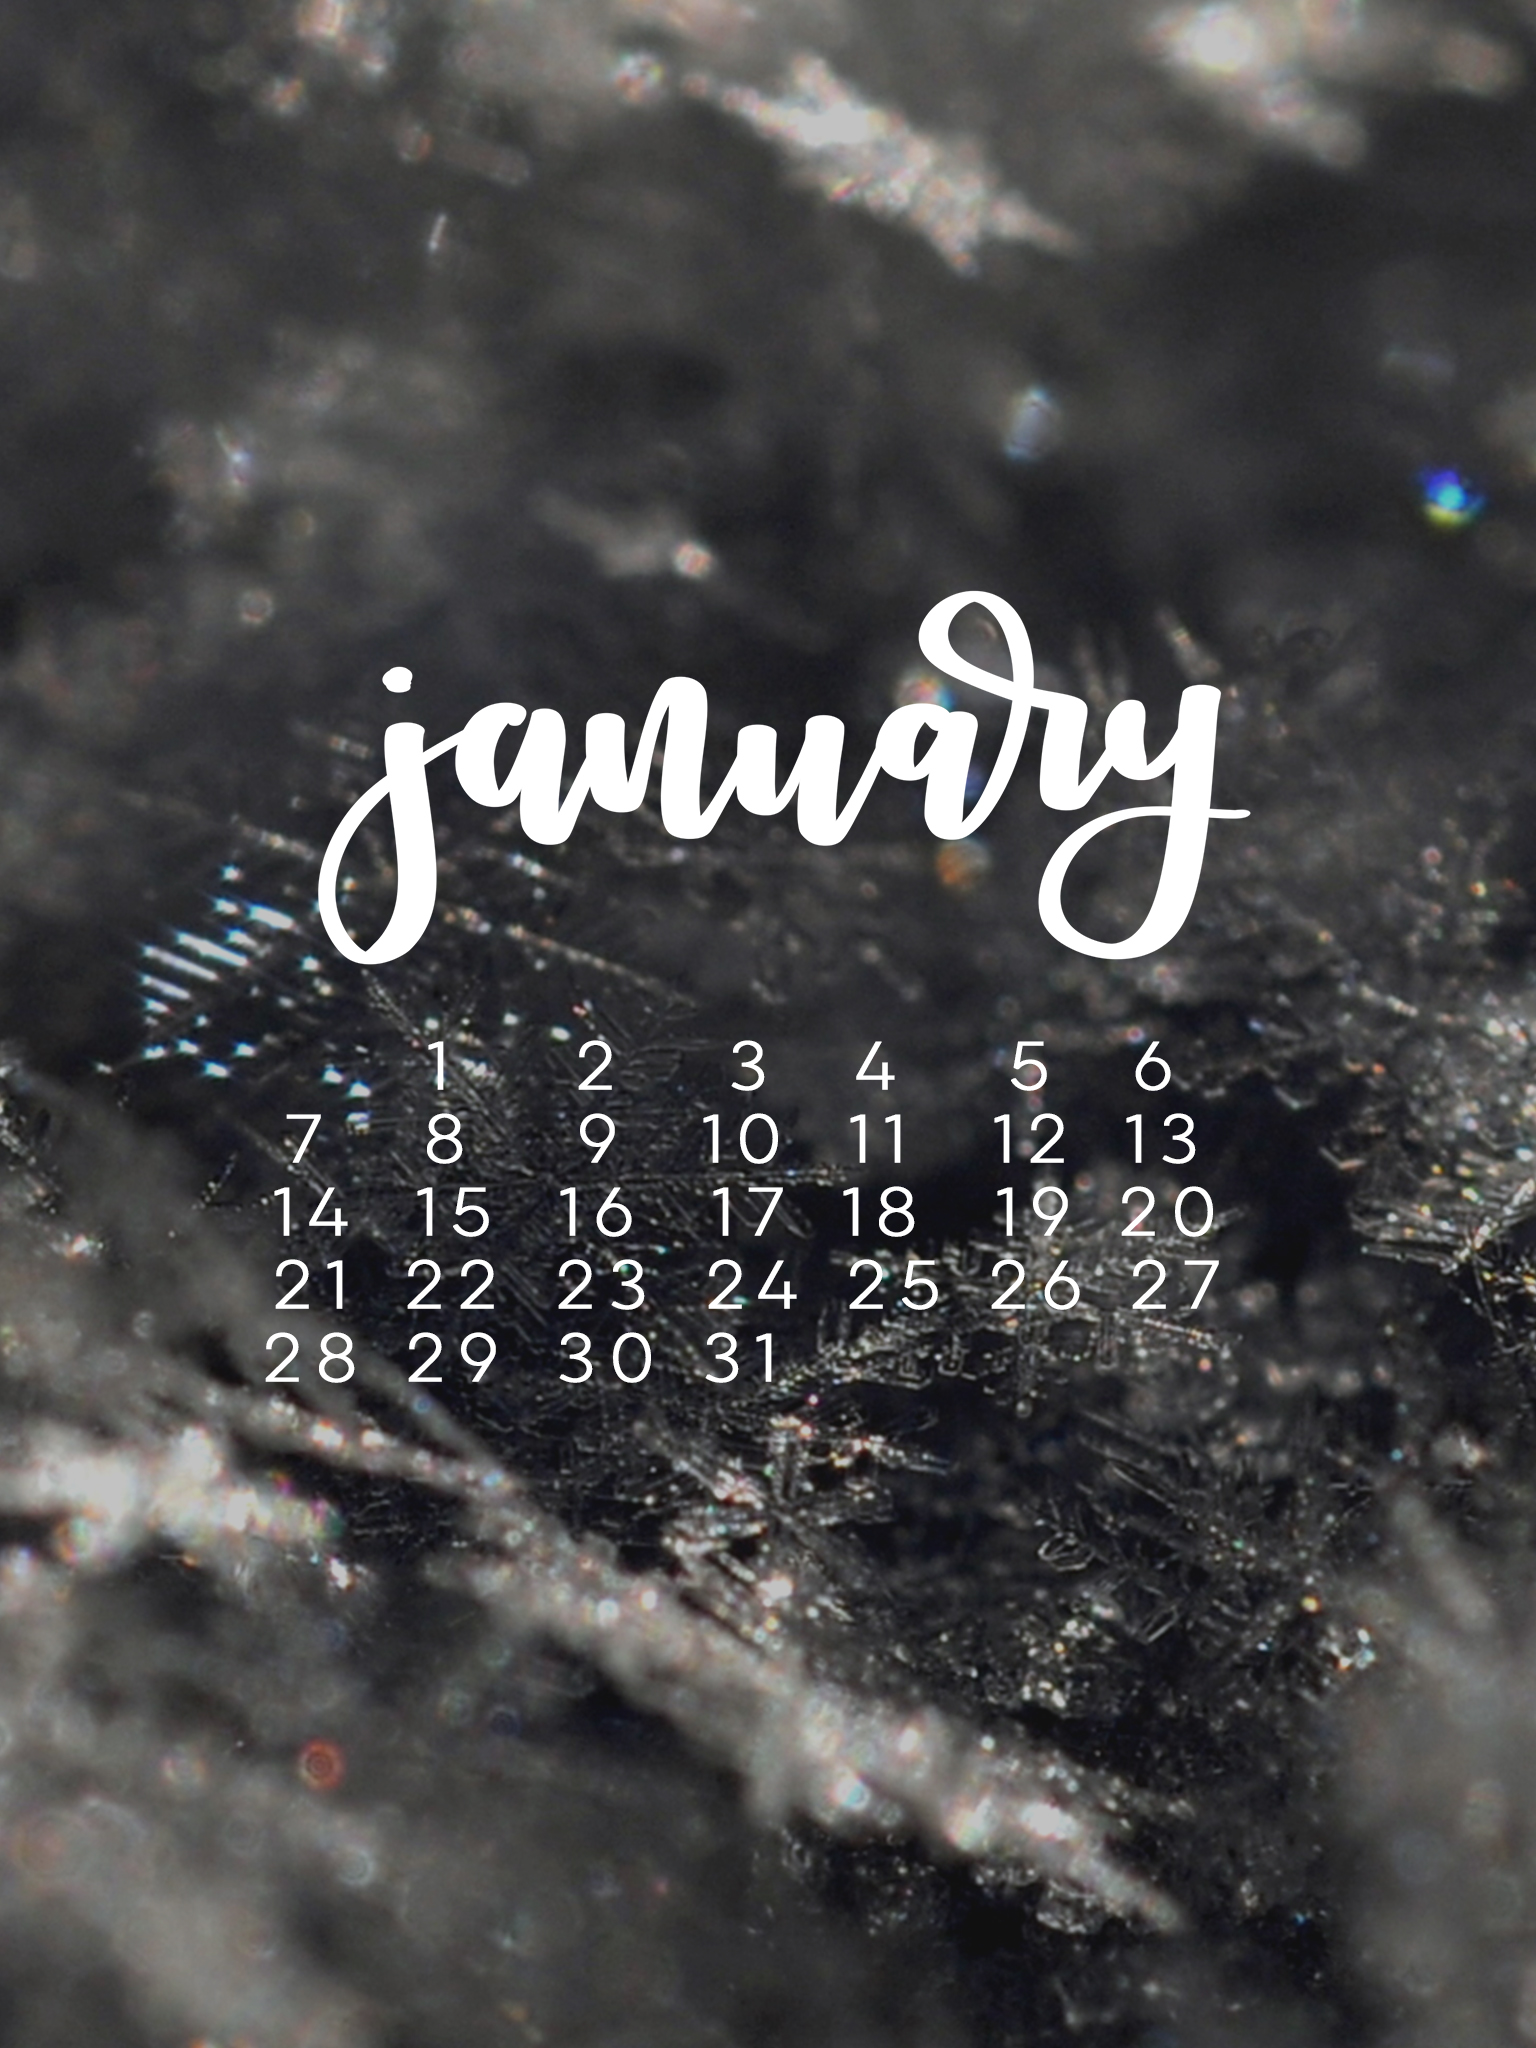 What She Tackles Conquers January Tech Wallpaper